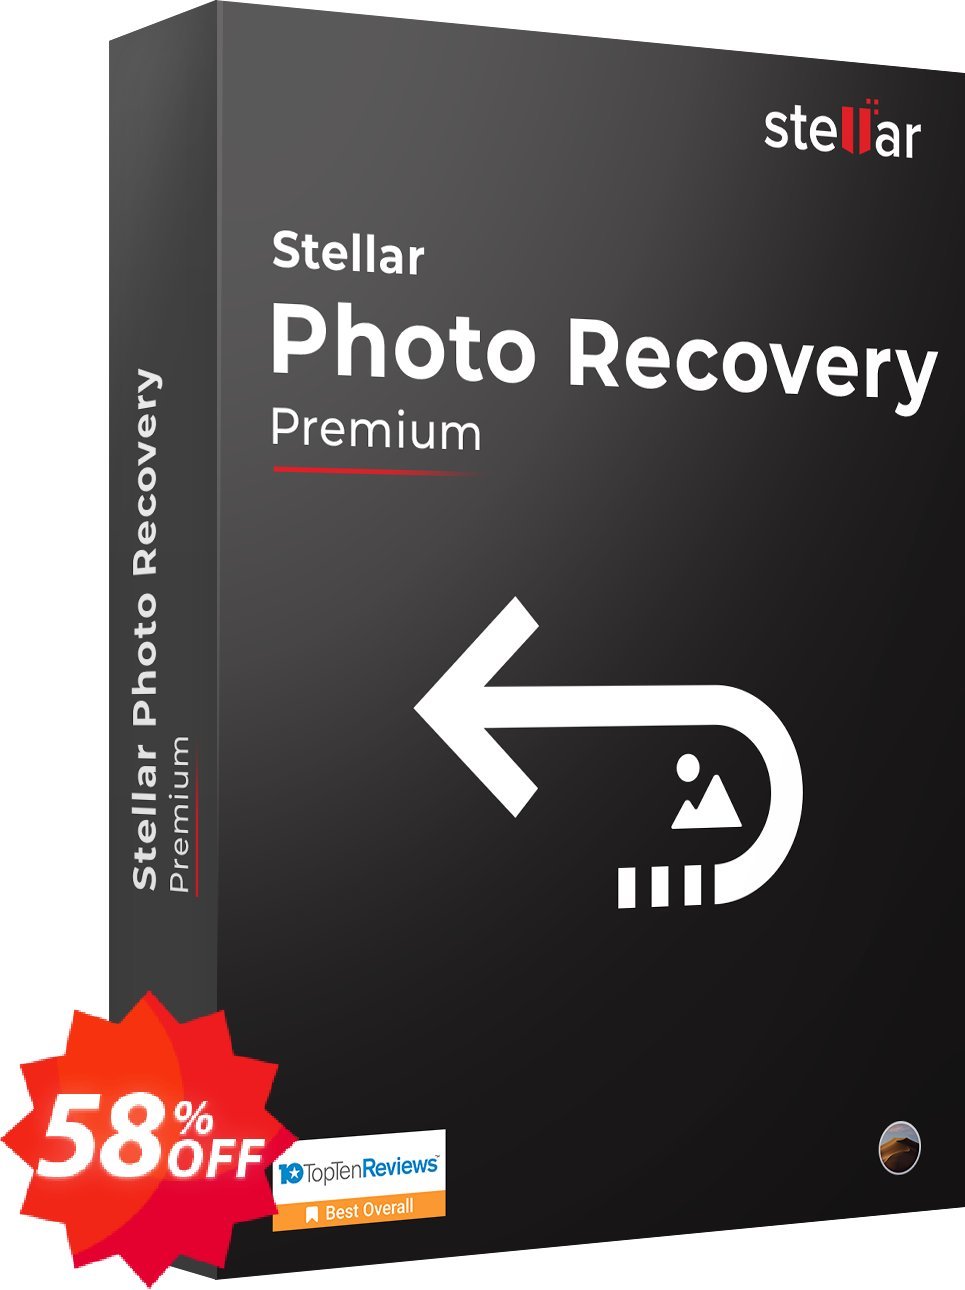 Stellar Photo Recovery Premium for MAC Coupon code 58% discount 